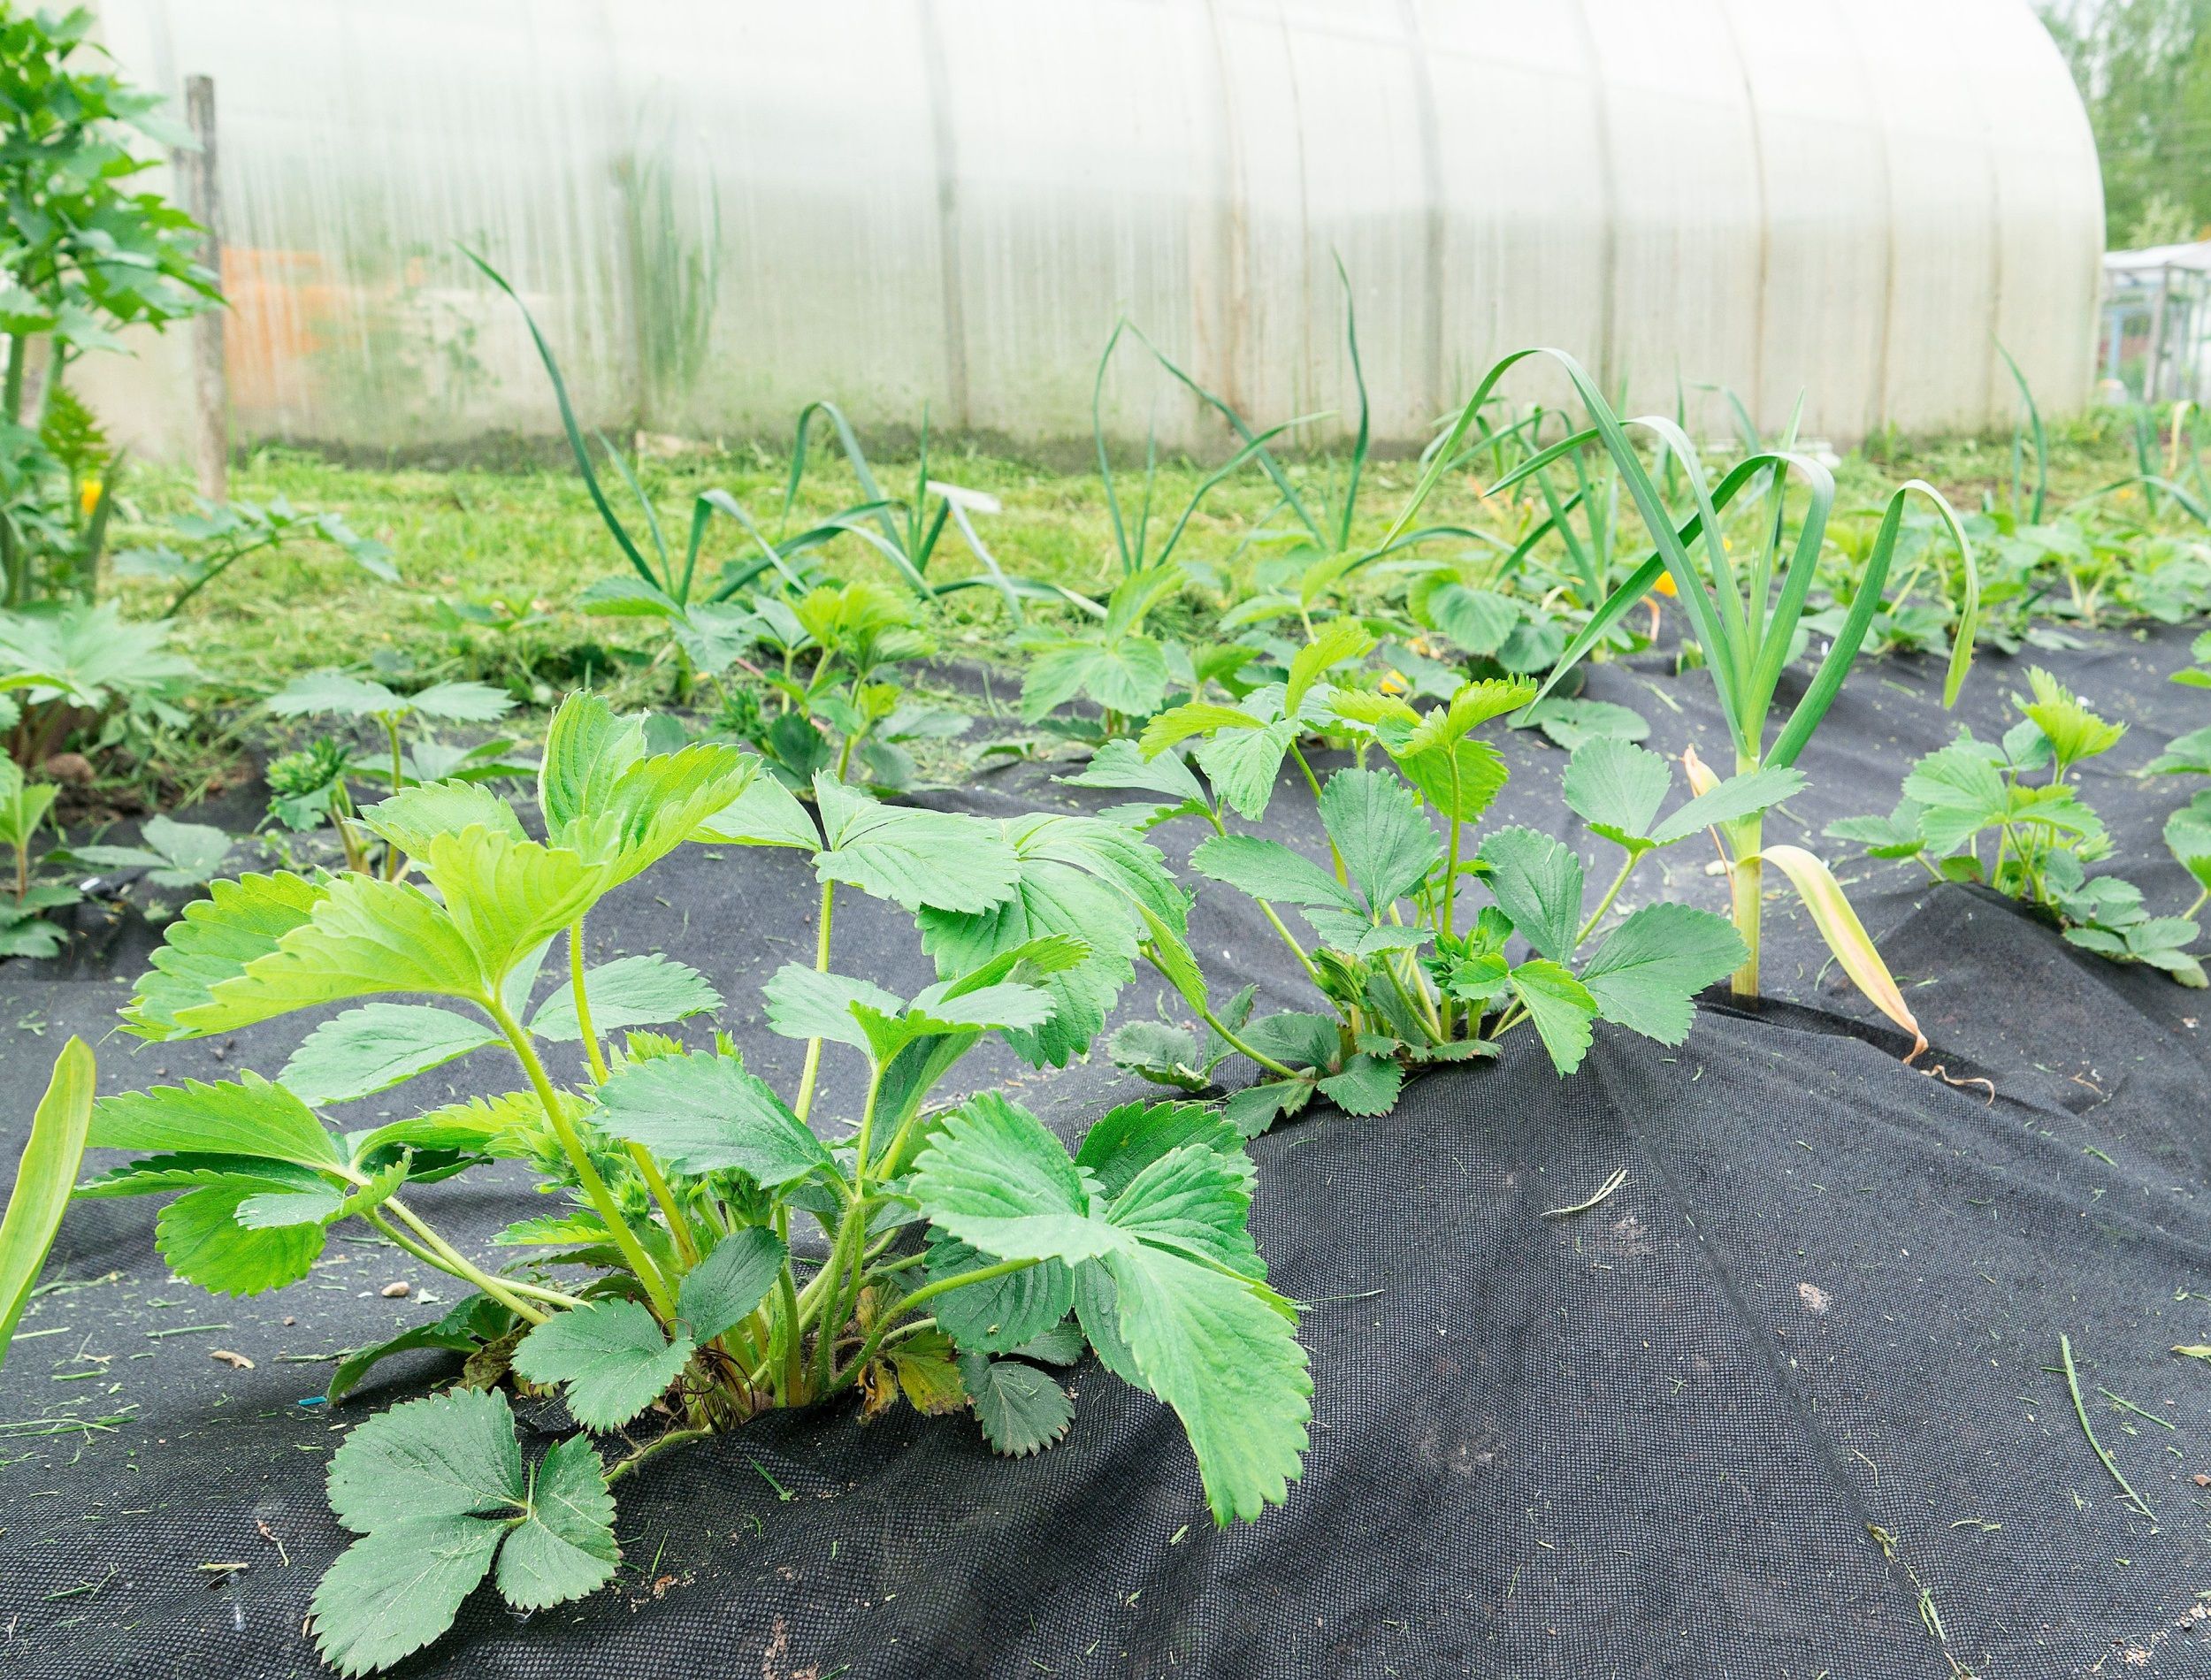 Strawberry seedlings grow in the garden, the ground is covered with geotextiles or landscape fabric